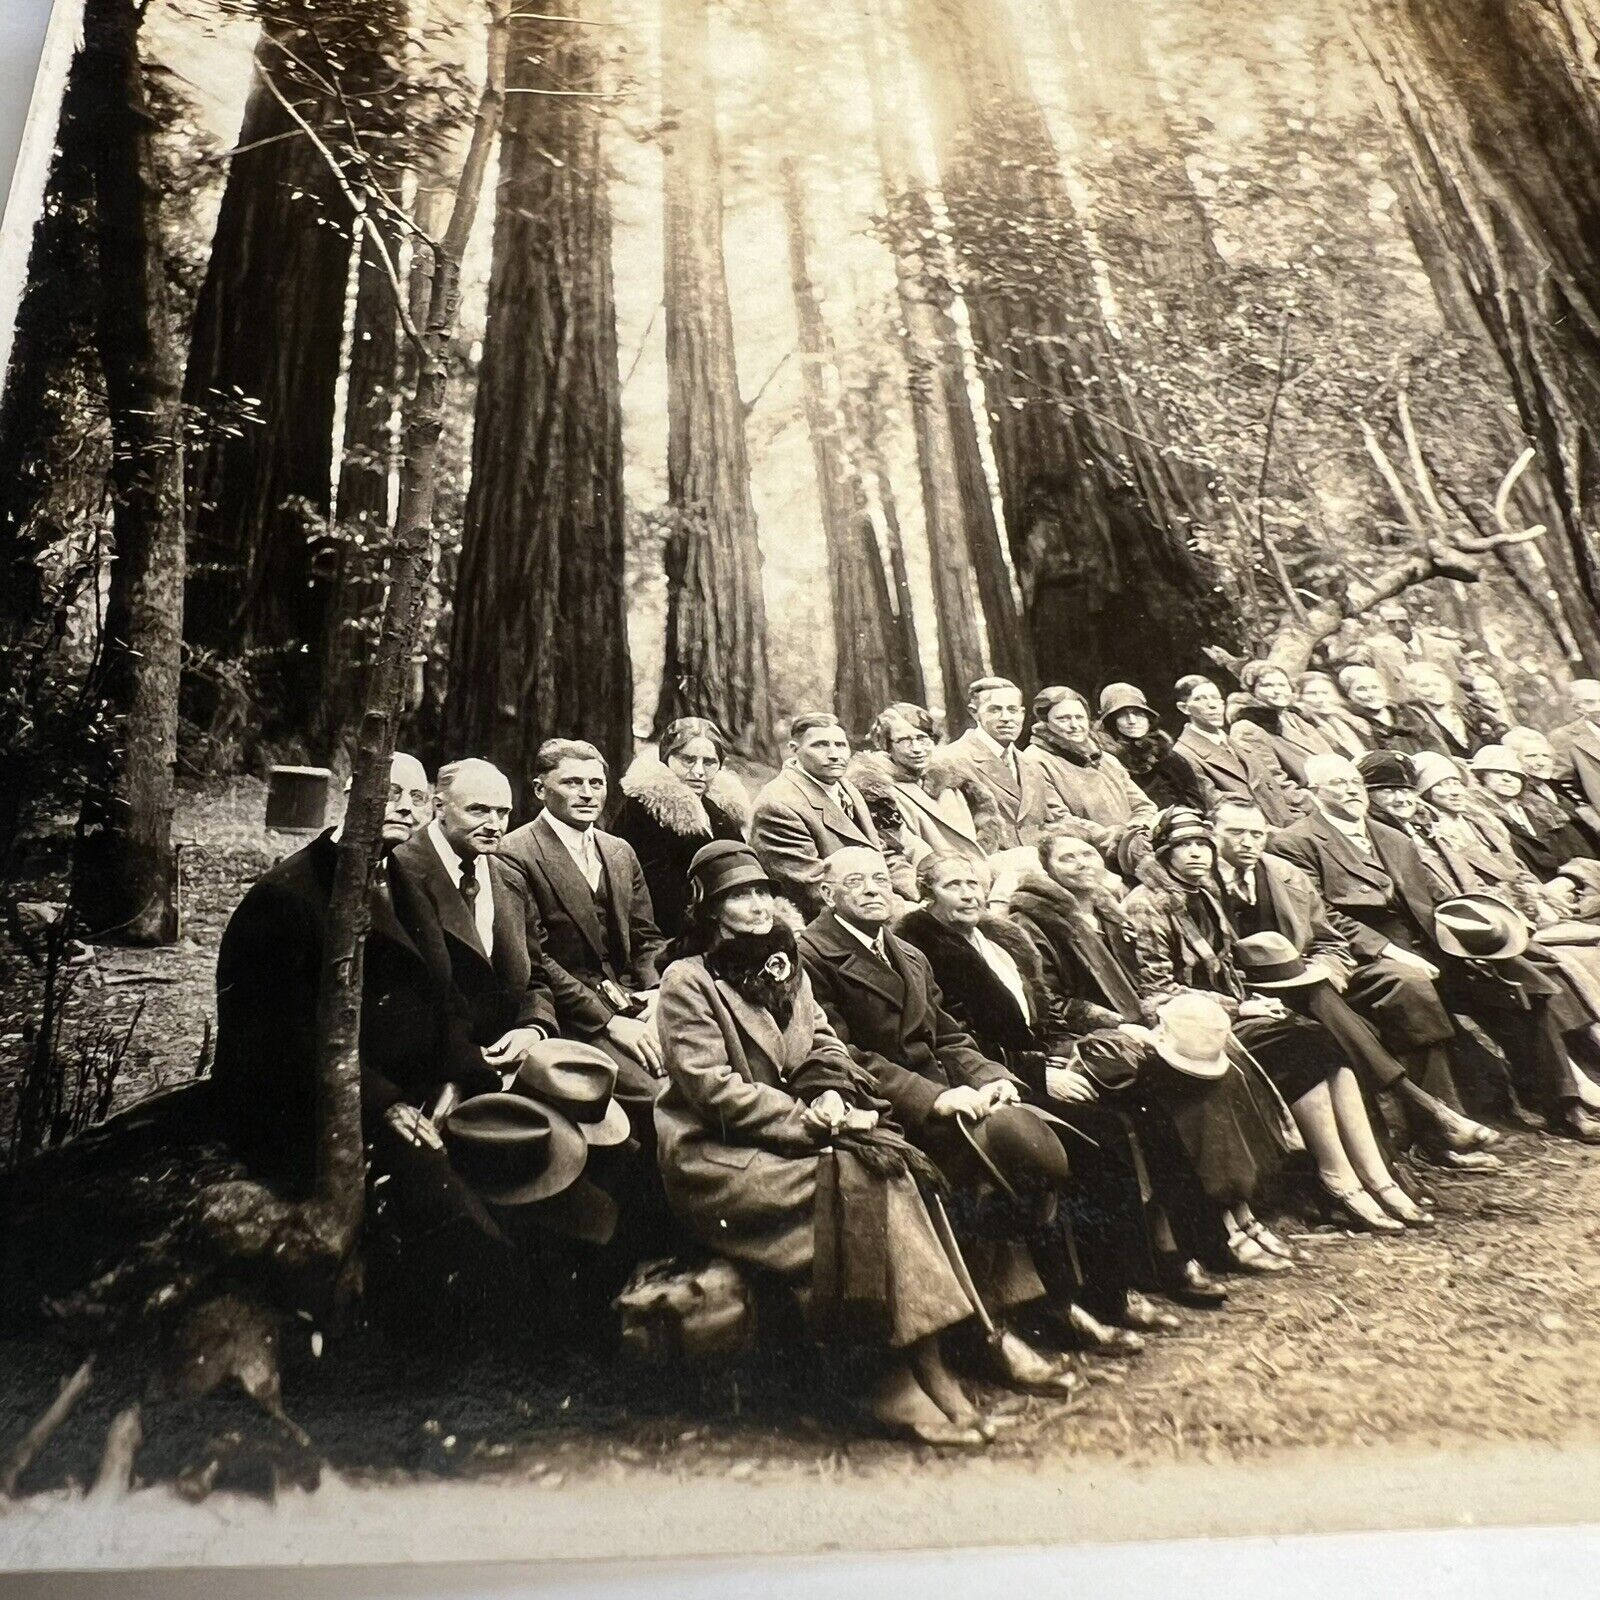 Vintage 1927 Photo, Group Picture, Muir Woods National Monument, California